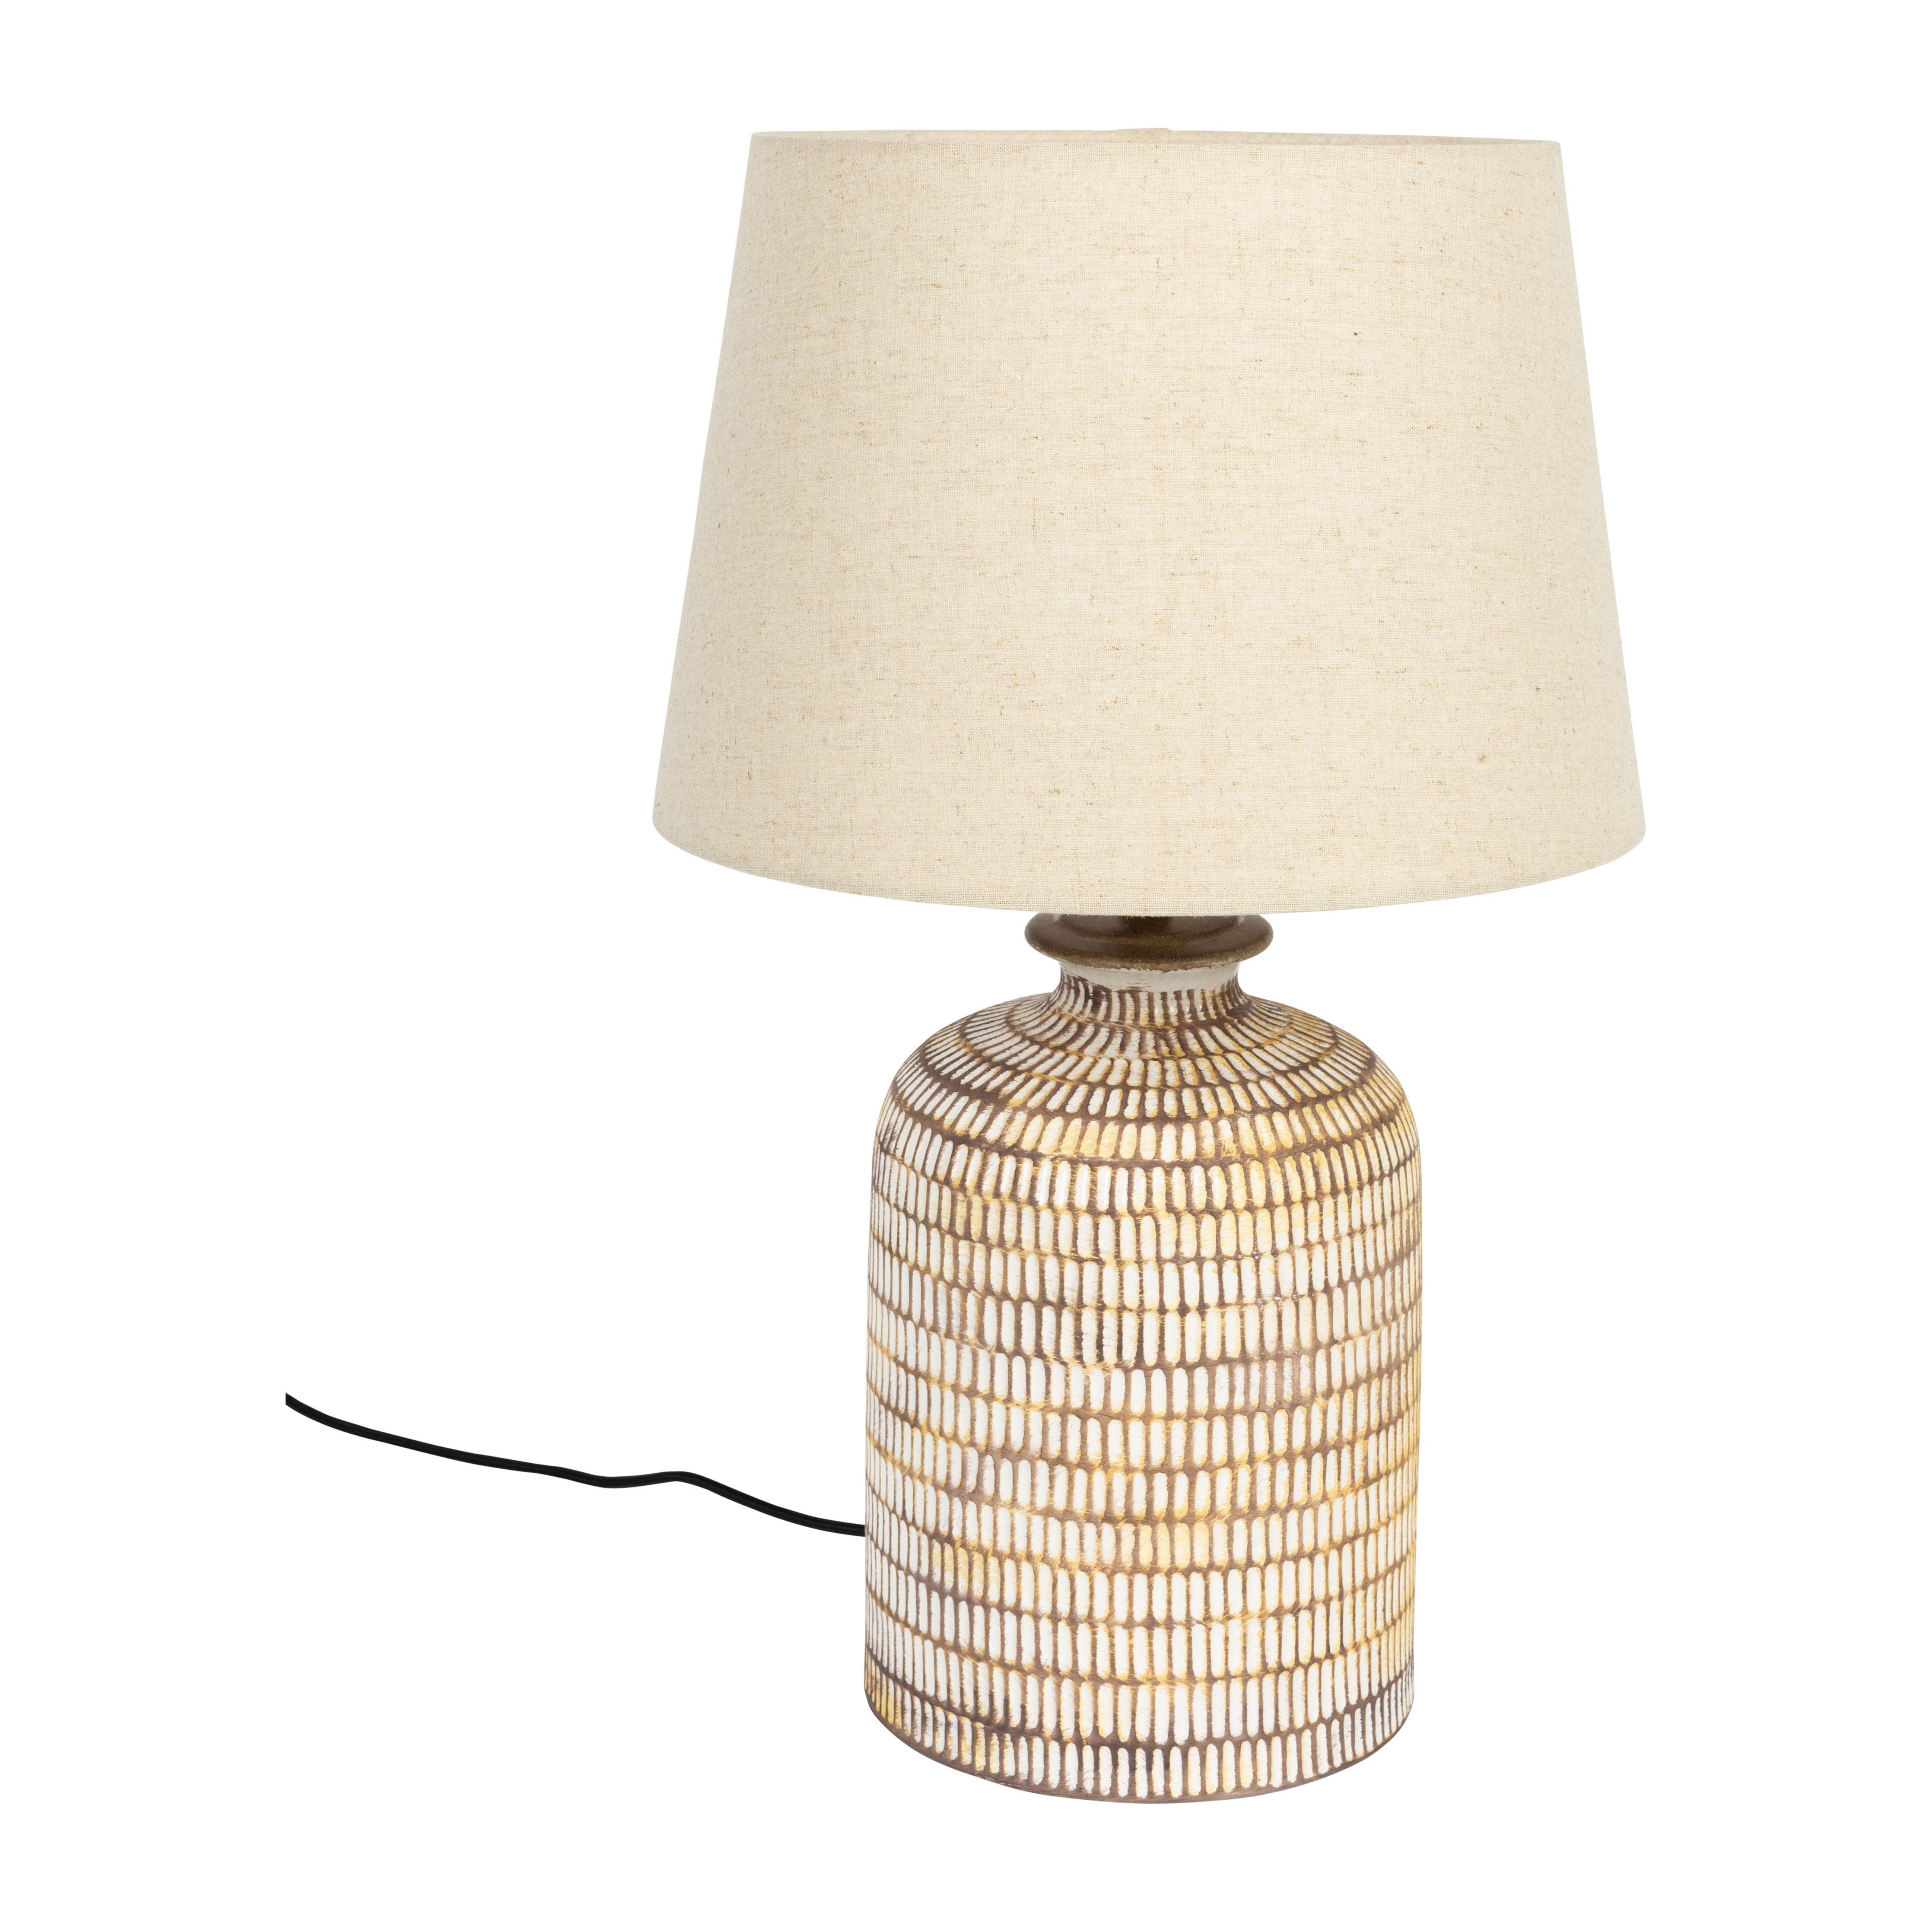 Table lamp russel